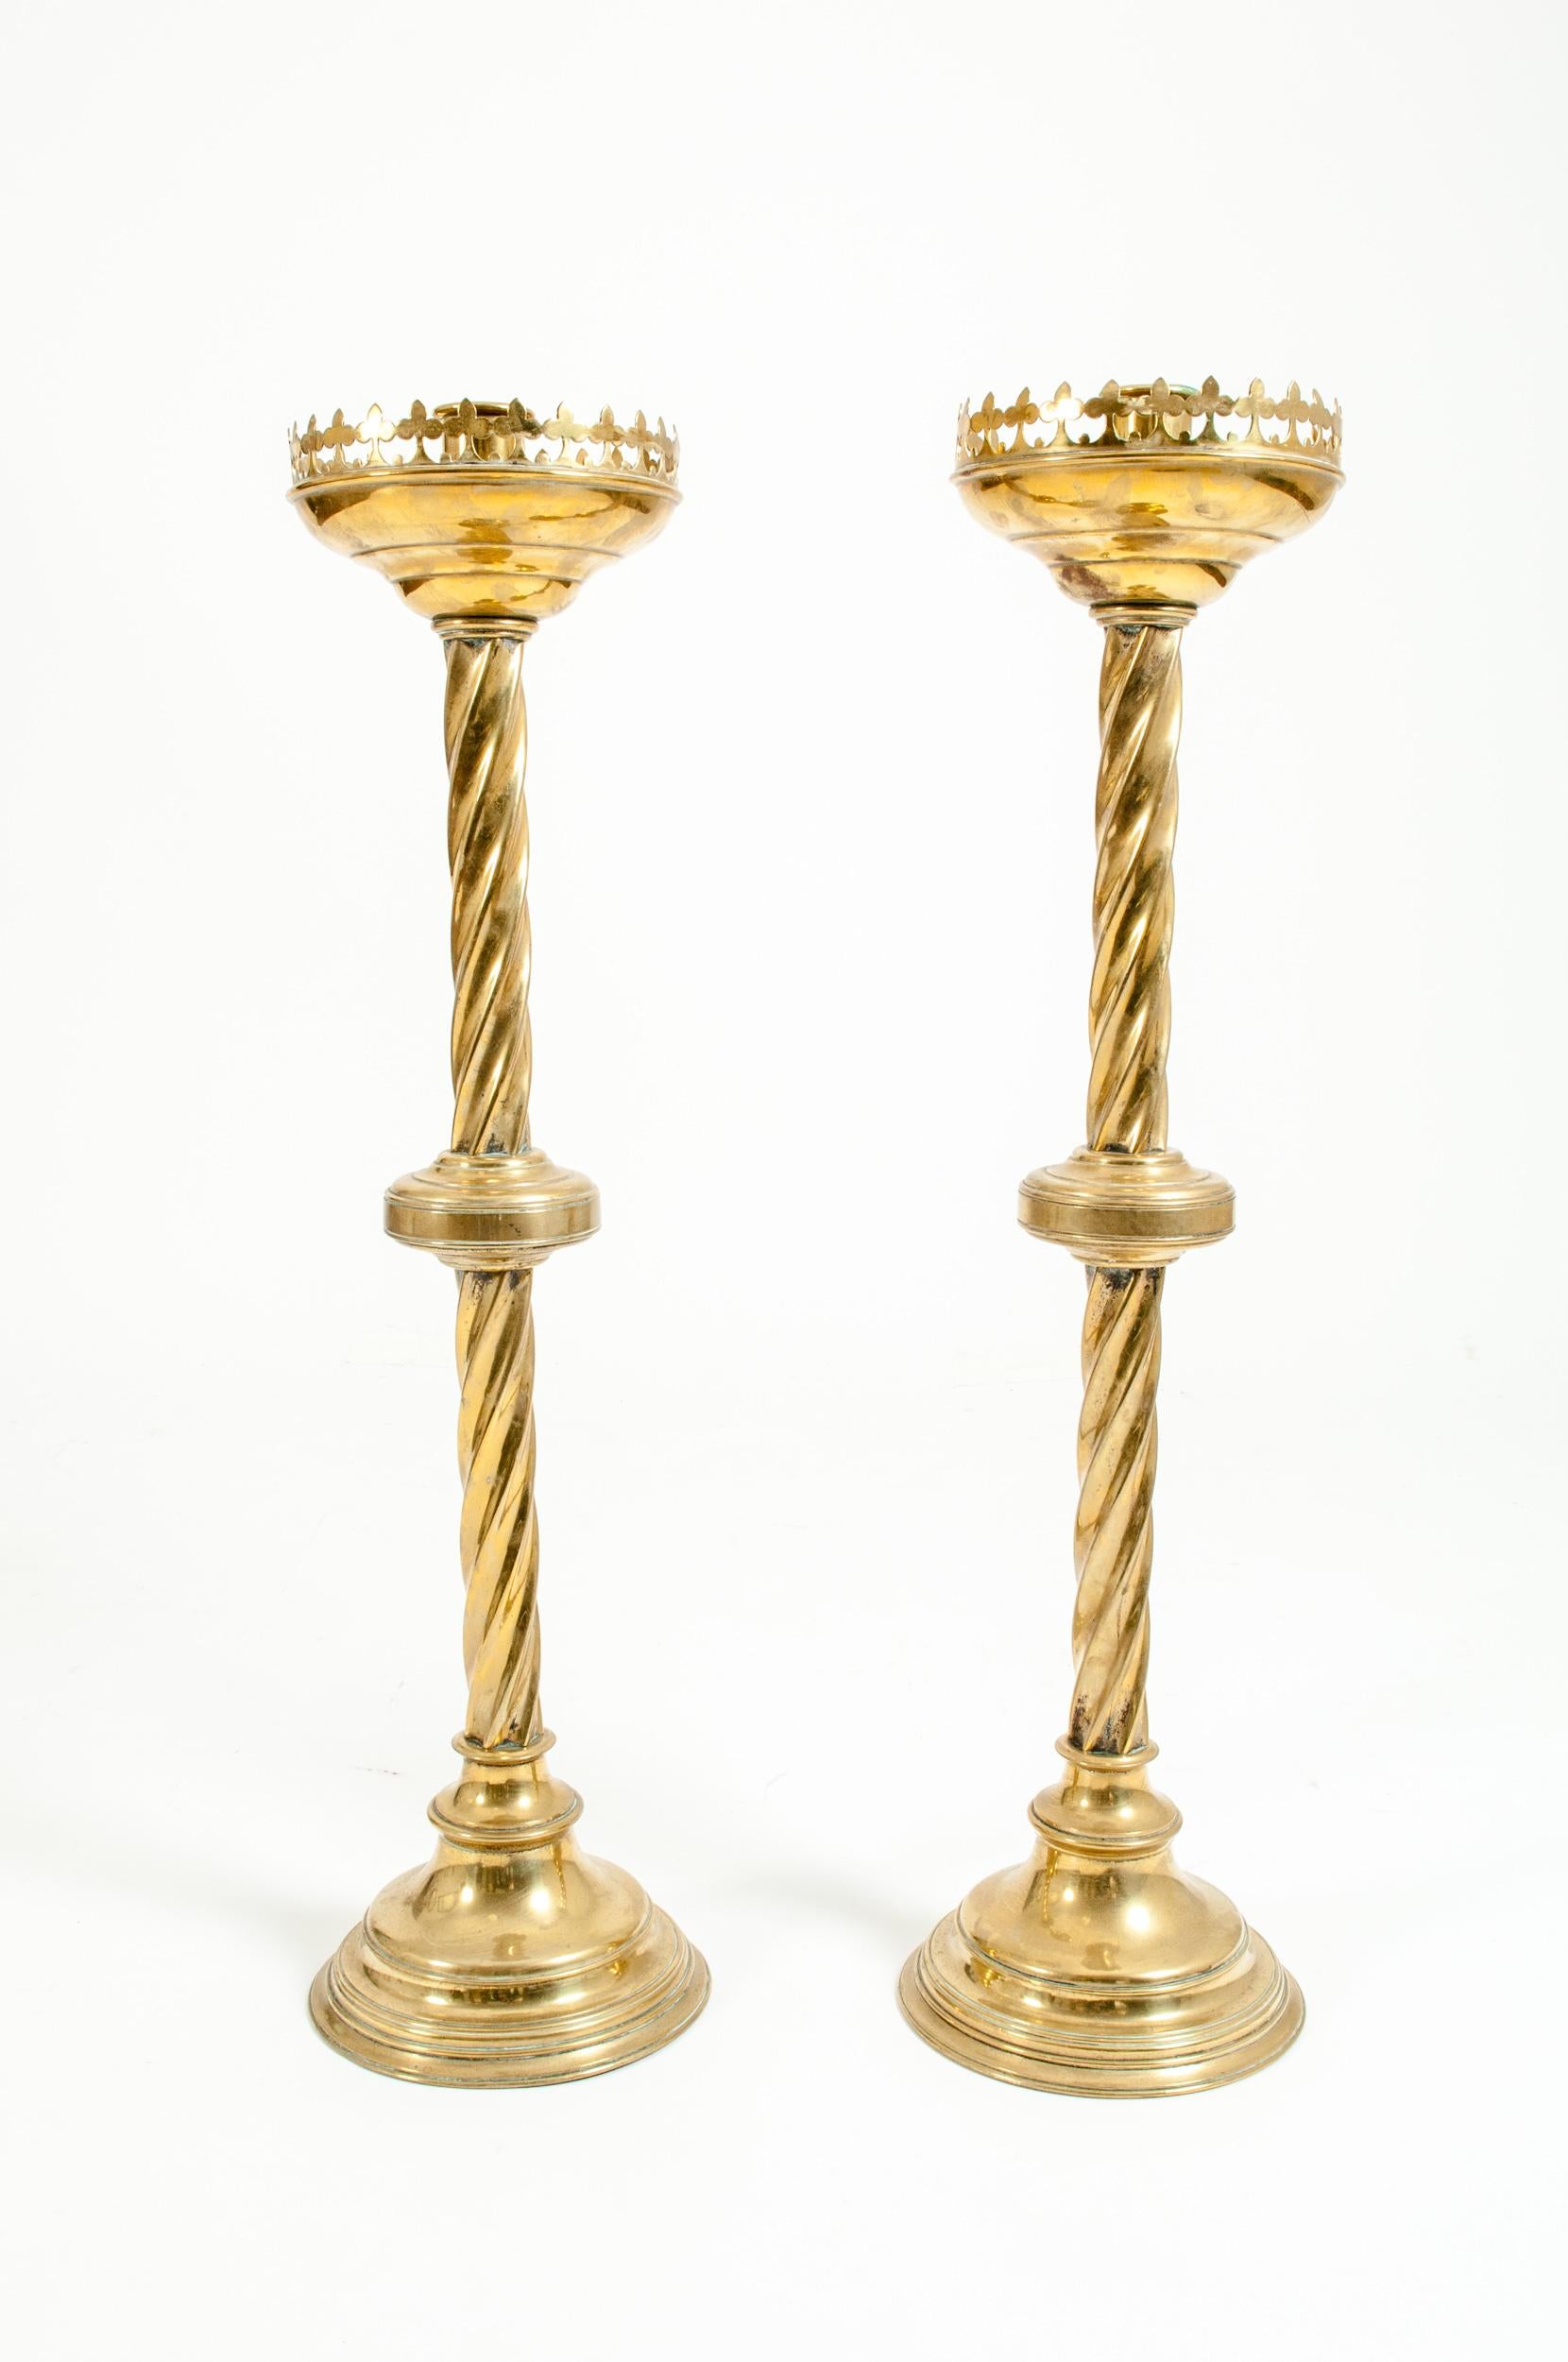 Tall & Ornately Decorative Pair of 19th Century Gothic Style Brass Candlesticks 2